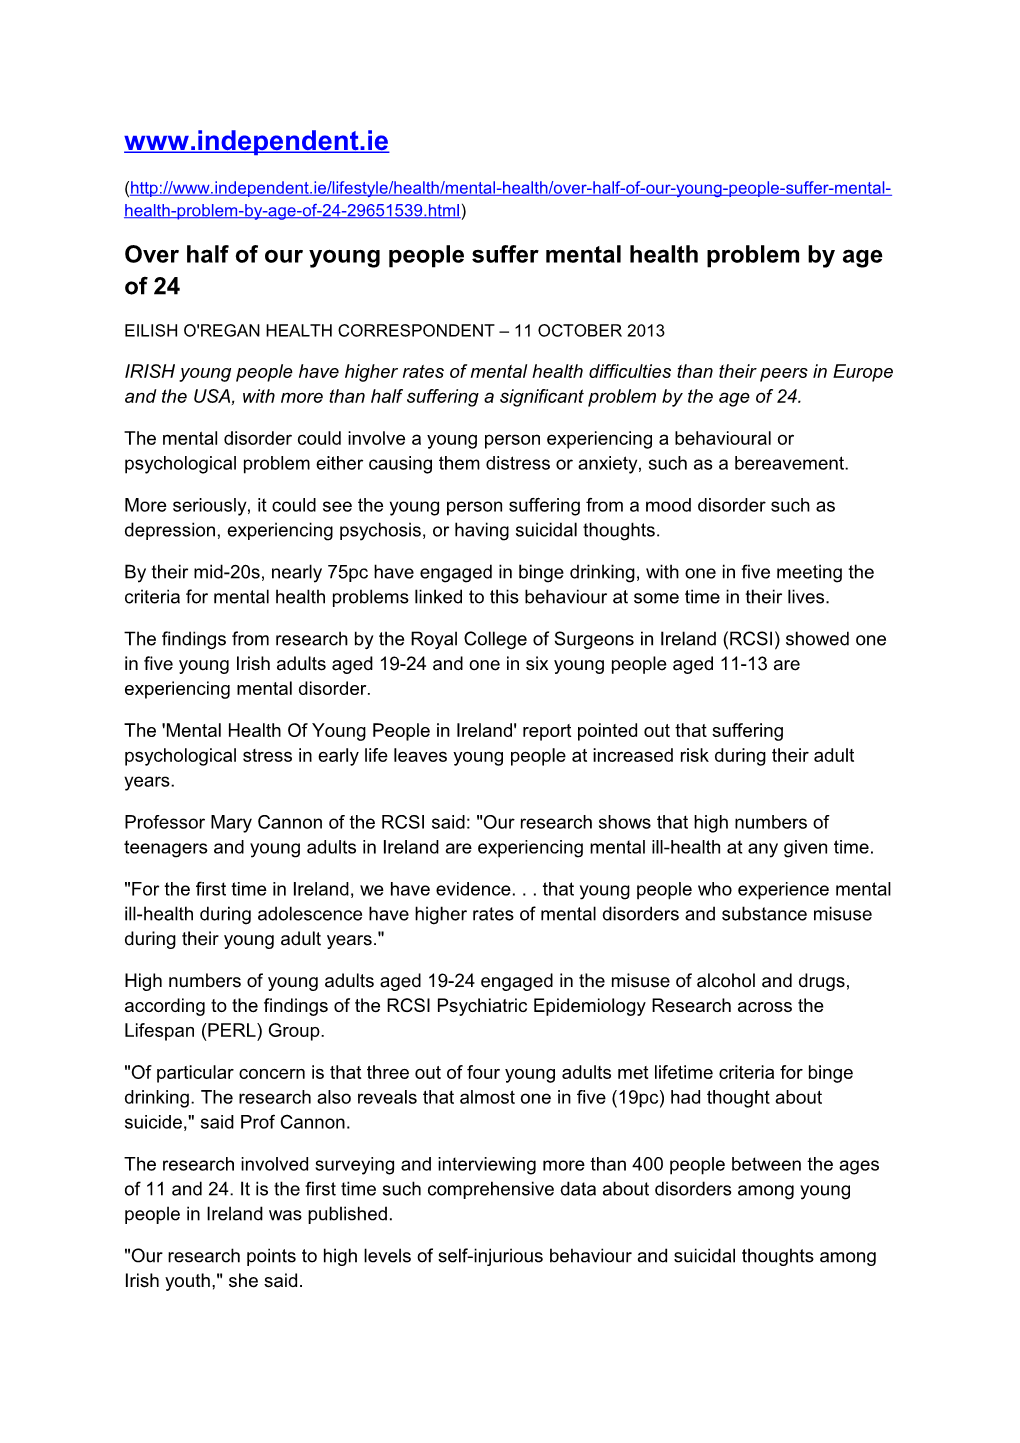 Over Half of Our Young People Suffer Mental Health Problem by Age of 24